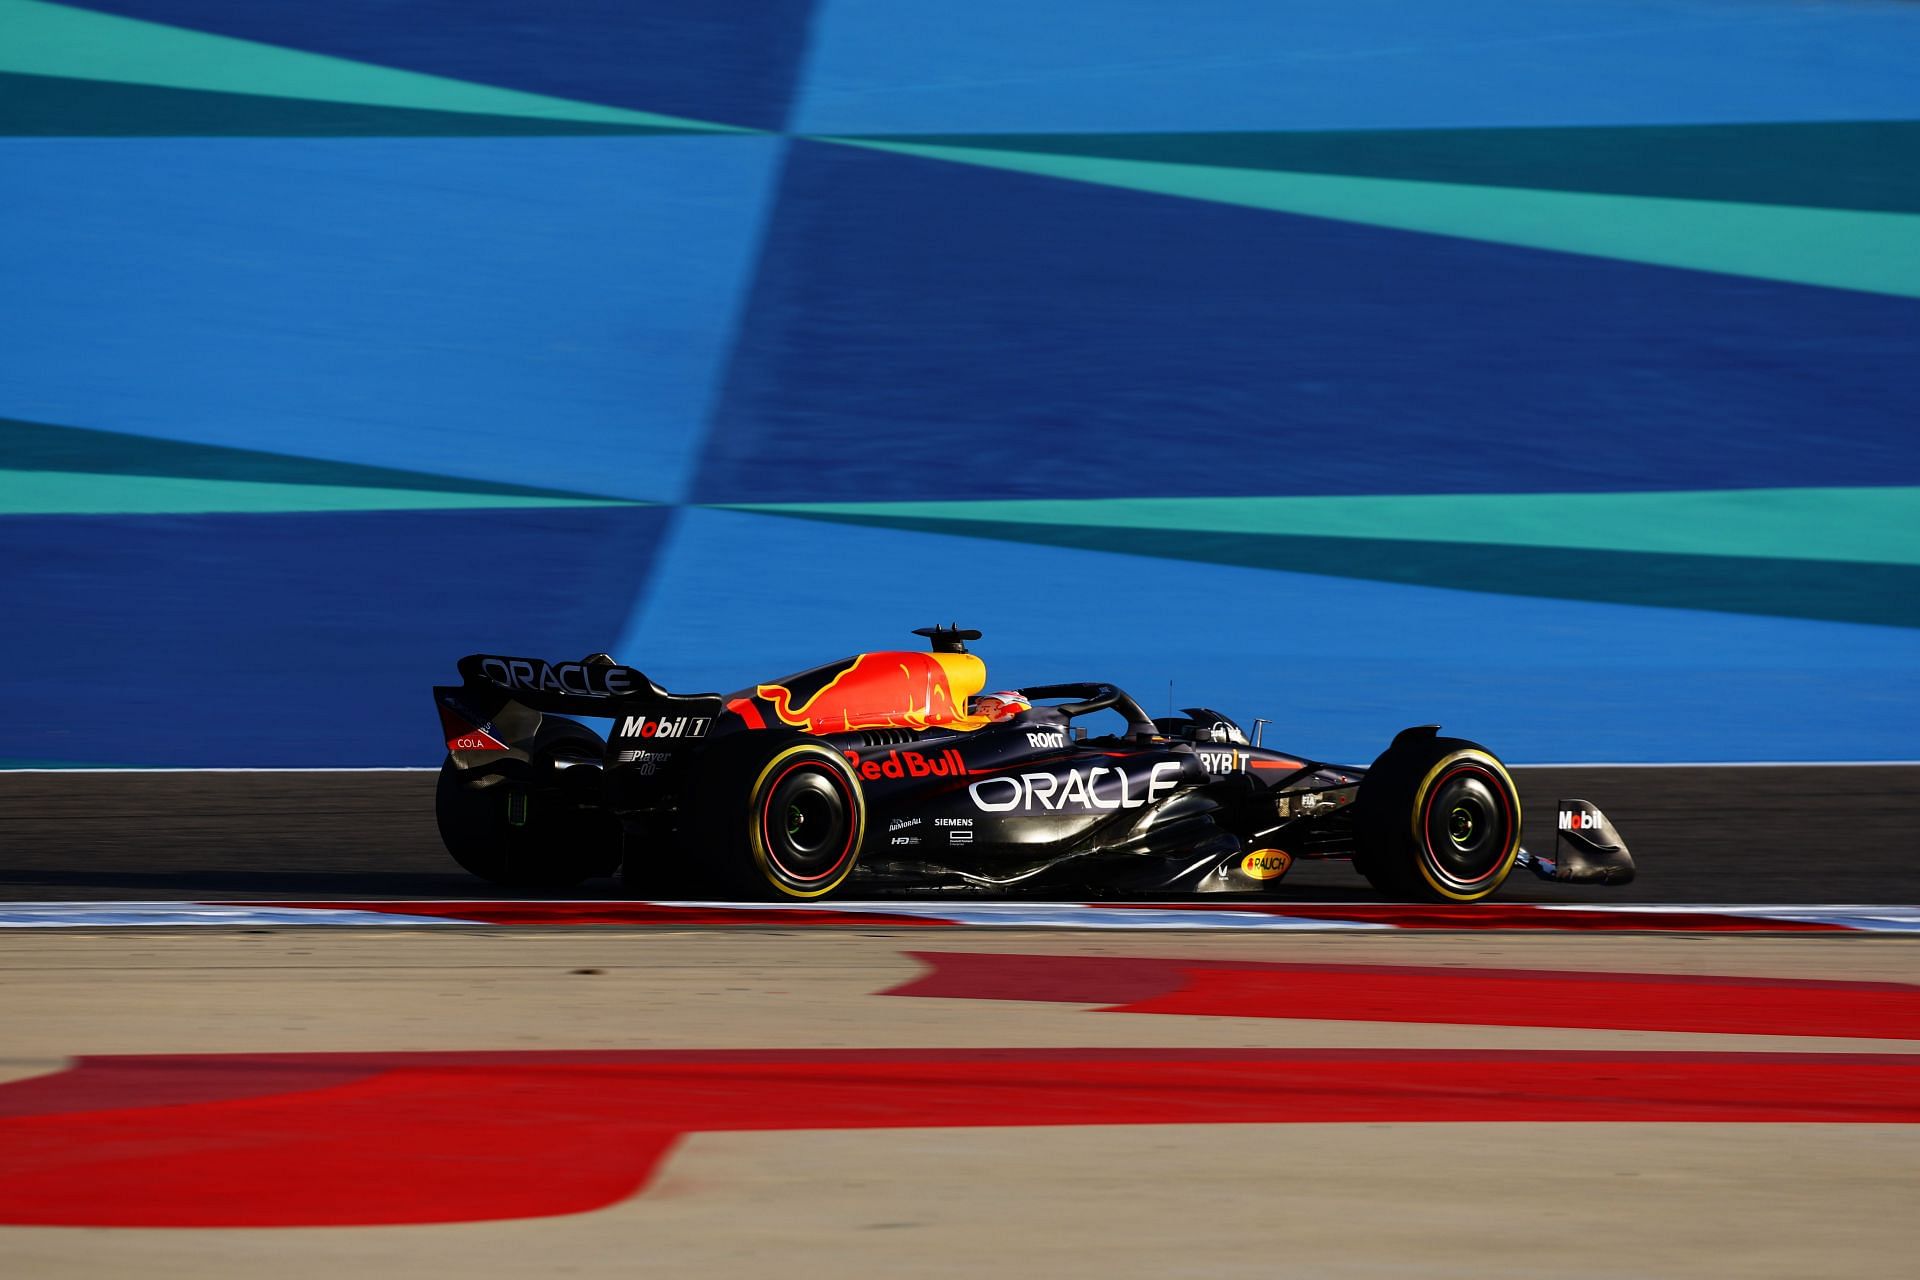 Max Verstappen pips Carlos Sainz to record fastest lap time in the